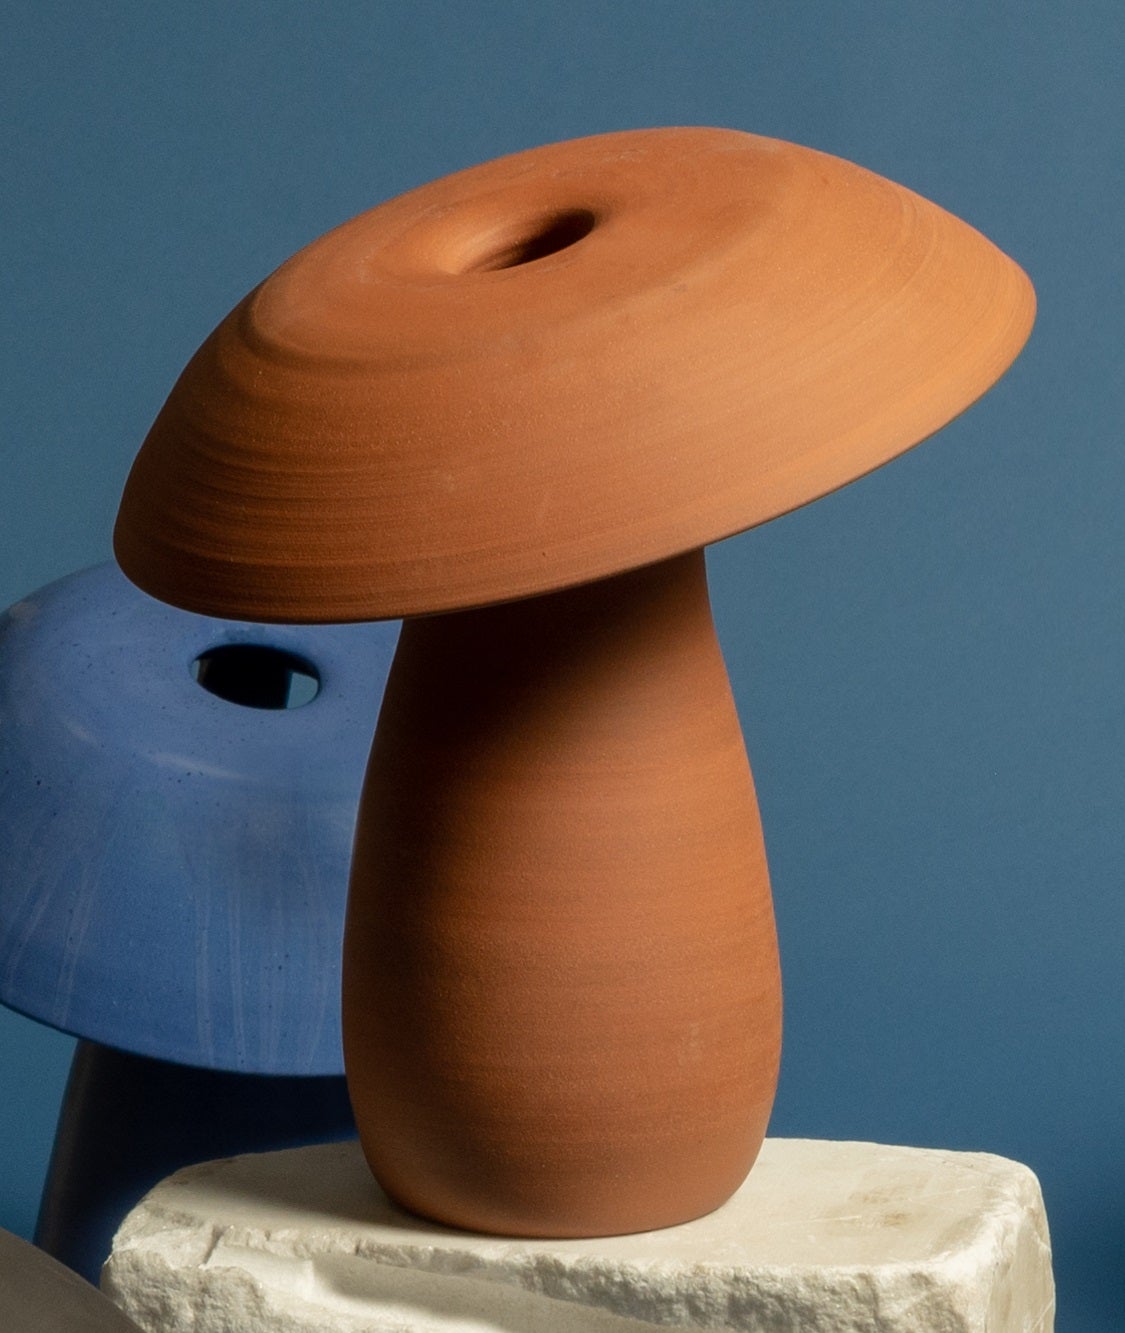 Terra-cotta raw small mushroom lamp by Nick Pourfard.
Dimensions: Ø 33 x H 38 cm.
Materials: ceramic.
Different finishes available. 

All our lamps can be wired according to each country. If sold to the USA it will be wired for the USA for